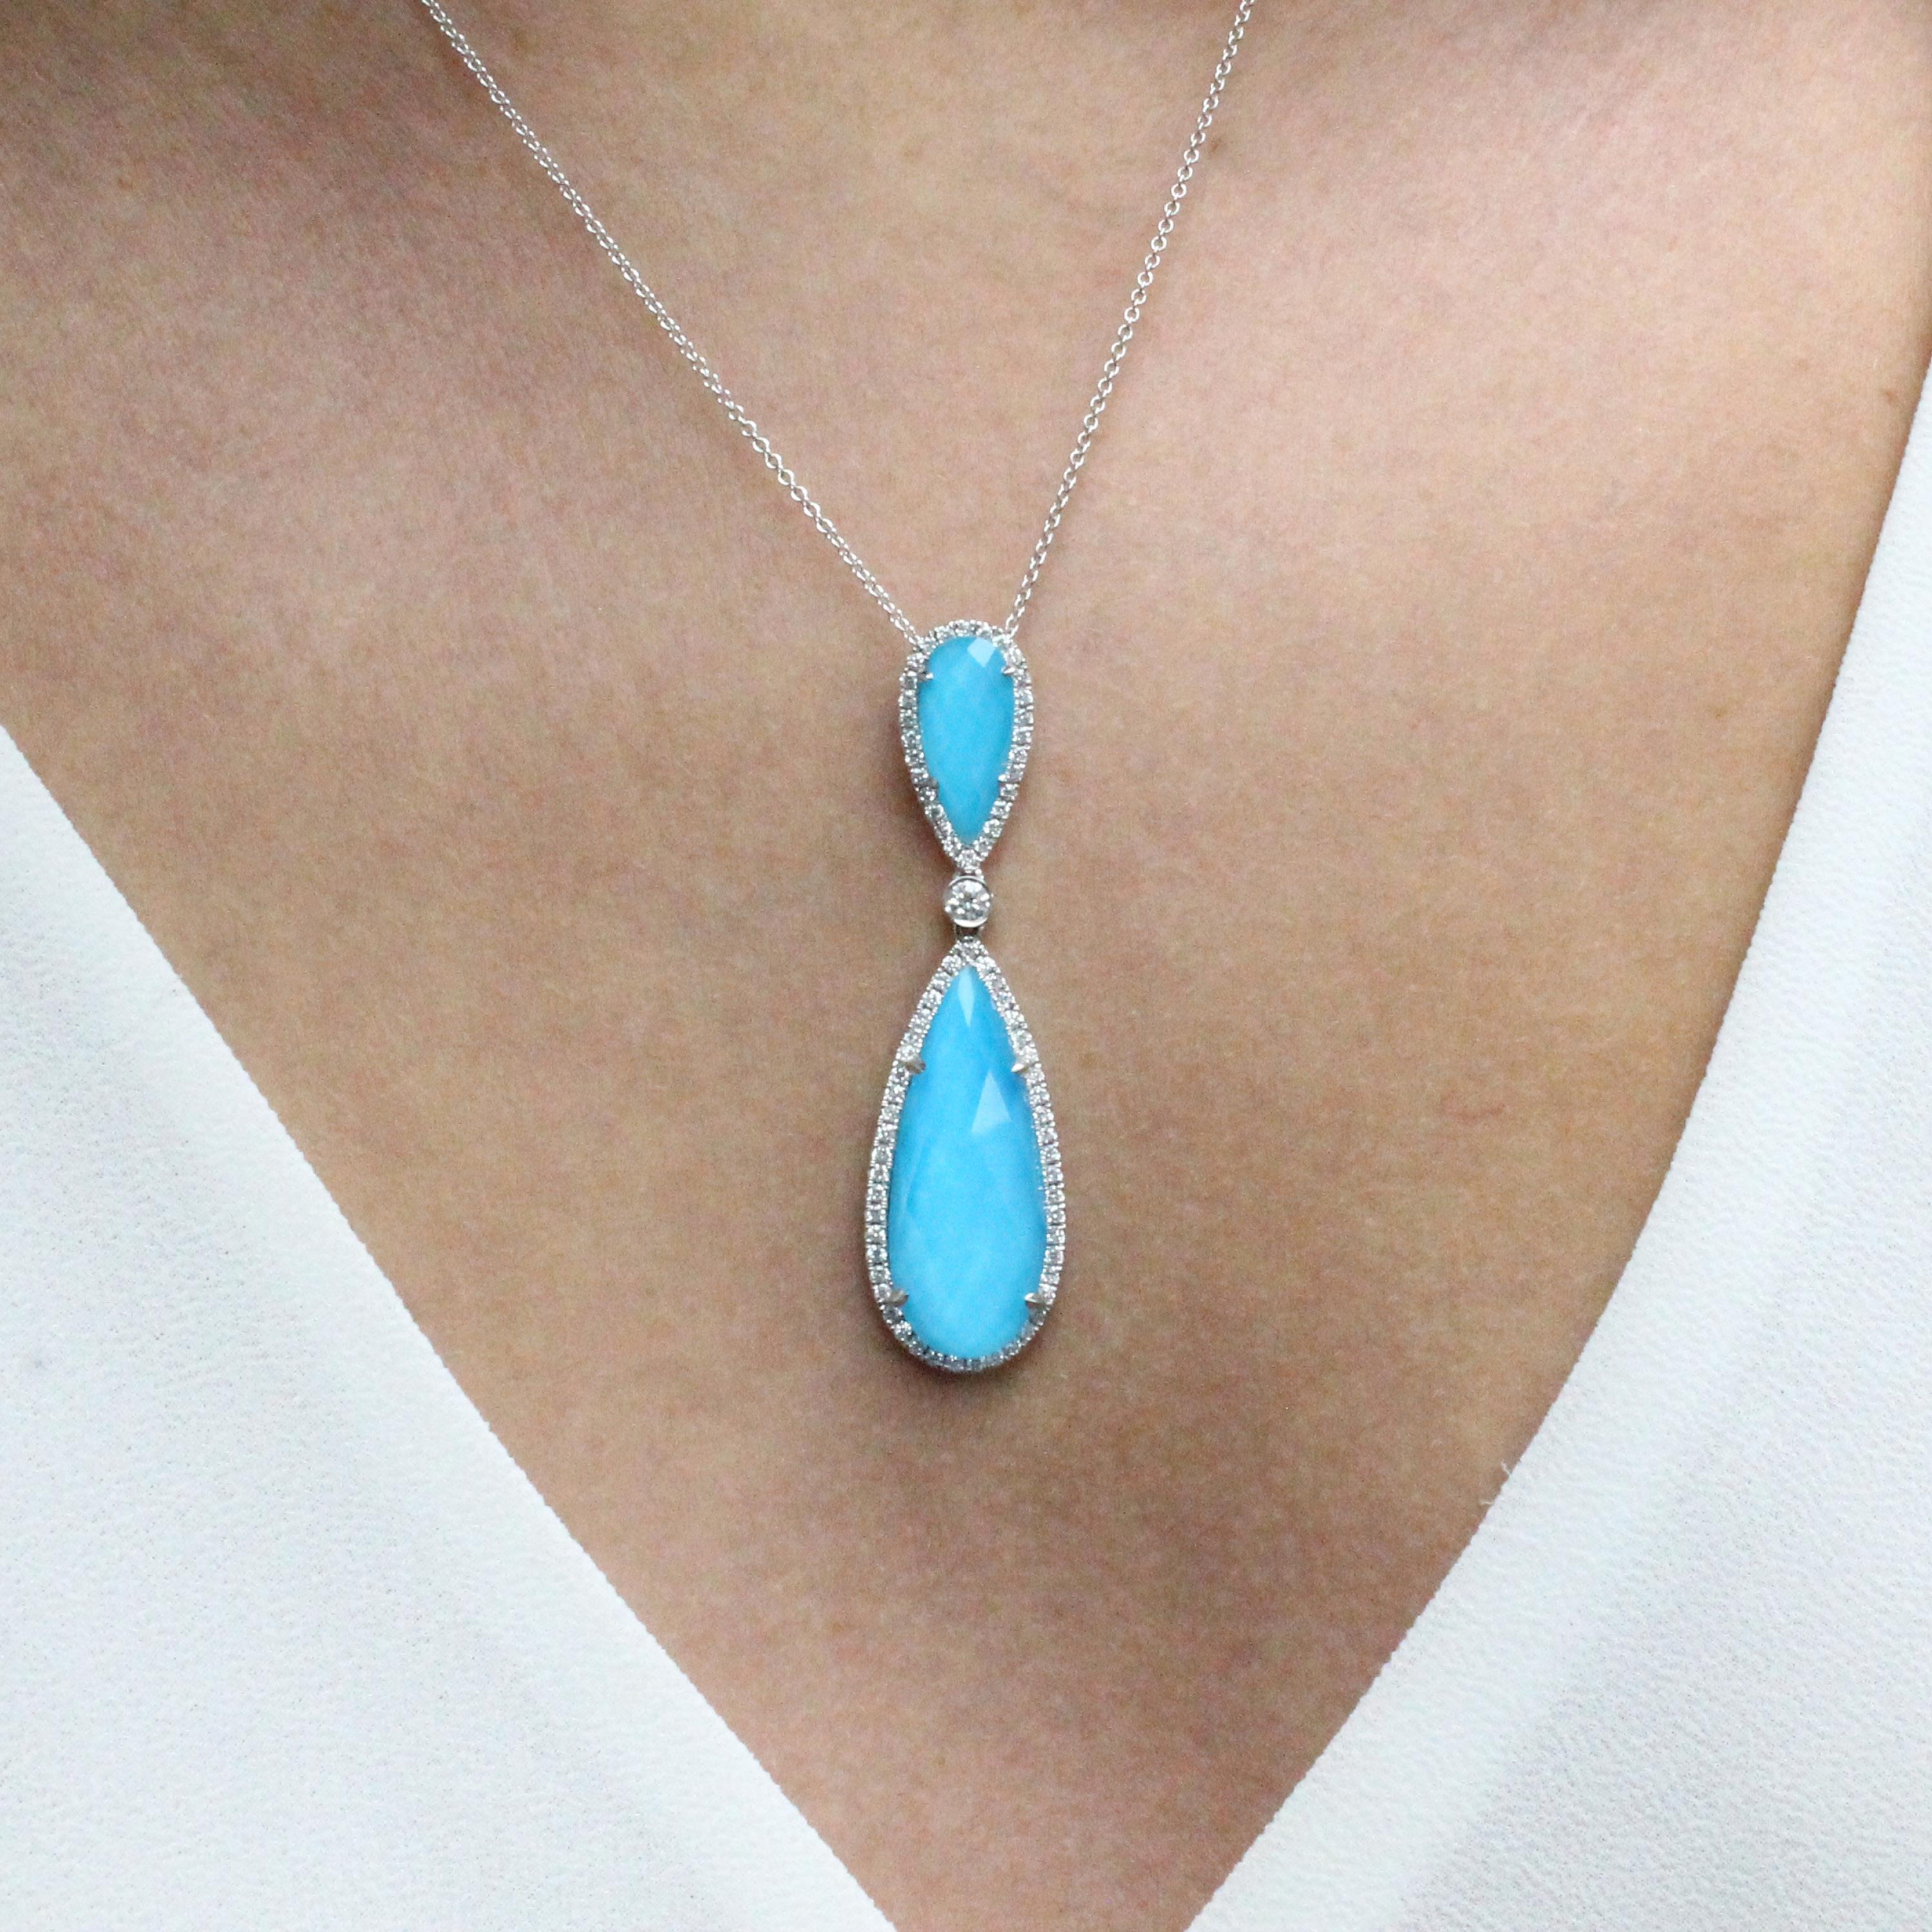 St. Barths Blue Necklace featuring an (2) pear-shape, checker-cut, White Topaz layered with Natural Arizona Turquoise, surrounded by diamonds, and a bezel-set diamond in between. 18